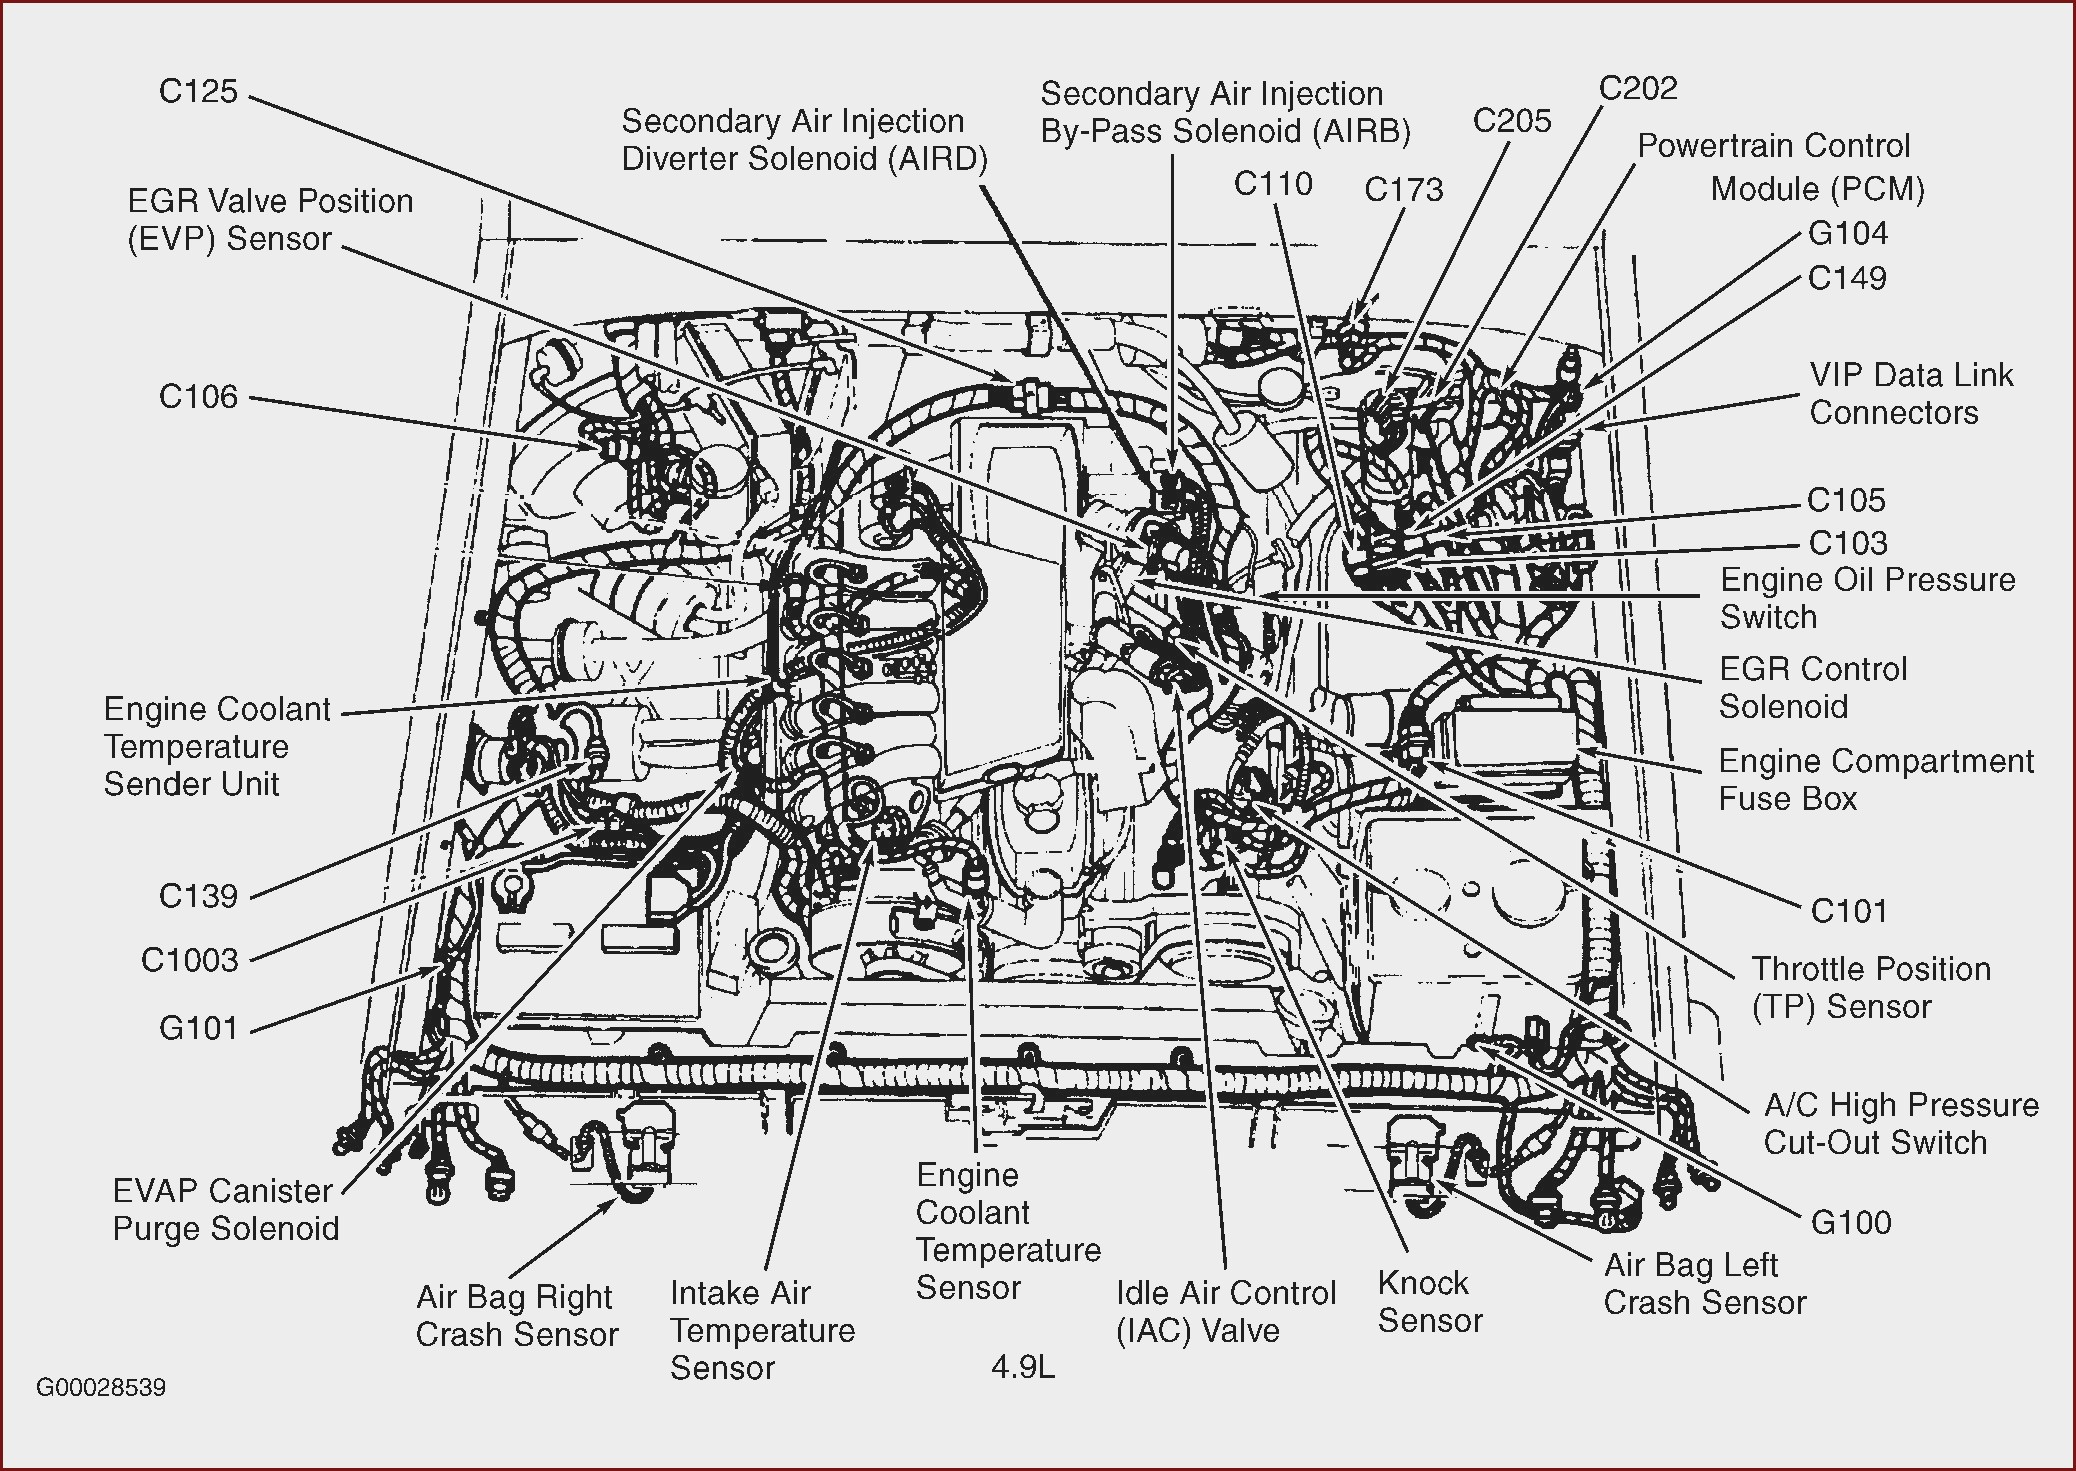 Car Engine Diagram for Driving Test Car Engine Diagram Poster at Manuals Library Of Car Engine Diagram for Driving Test